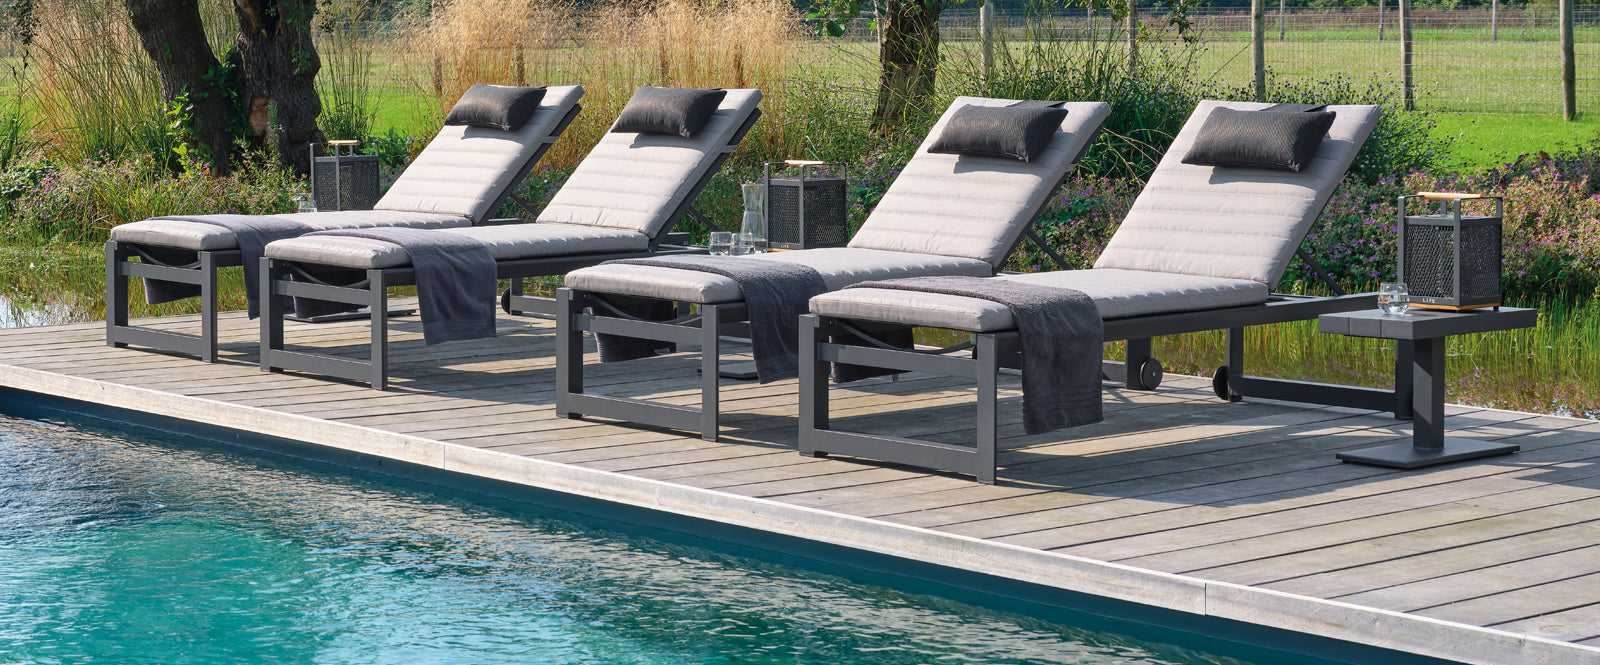 The integrated wheels in the back legs of the slim profiled Delta High Multi-Position Lounger makes it easy to move around your pool side or patio. The multi-position feature allows you to quickly adjust the back of the lounger and recline to your desired position.